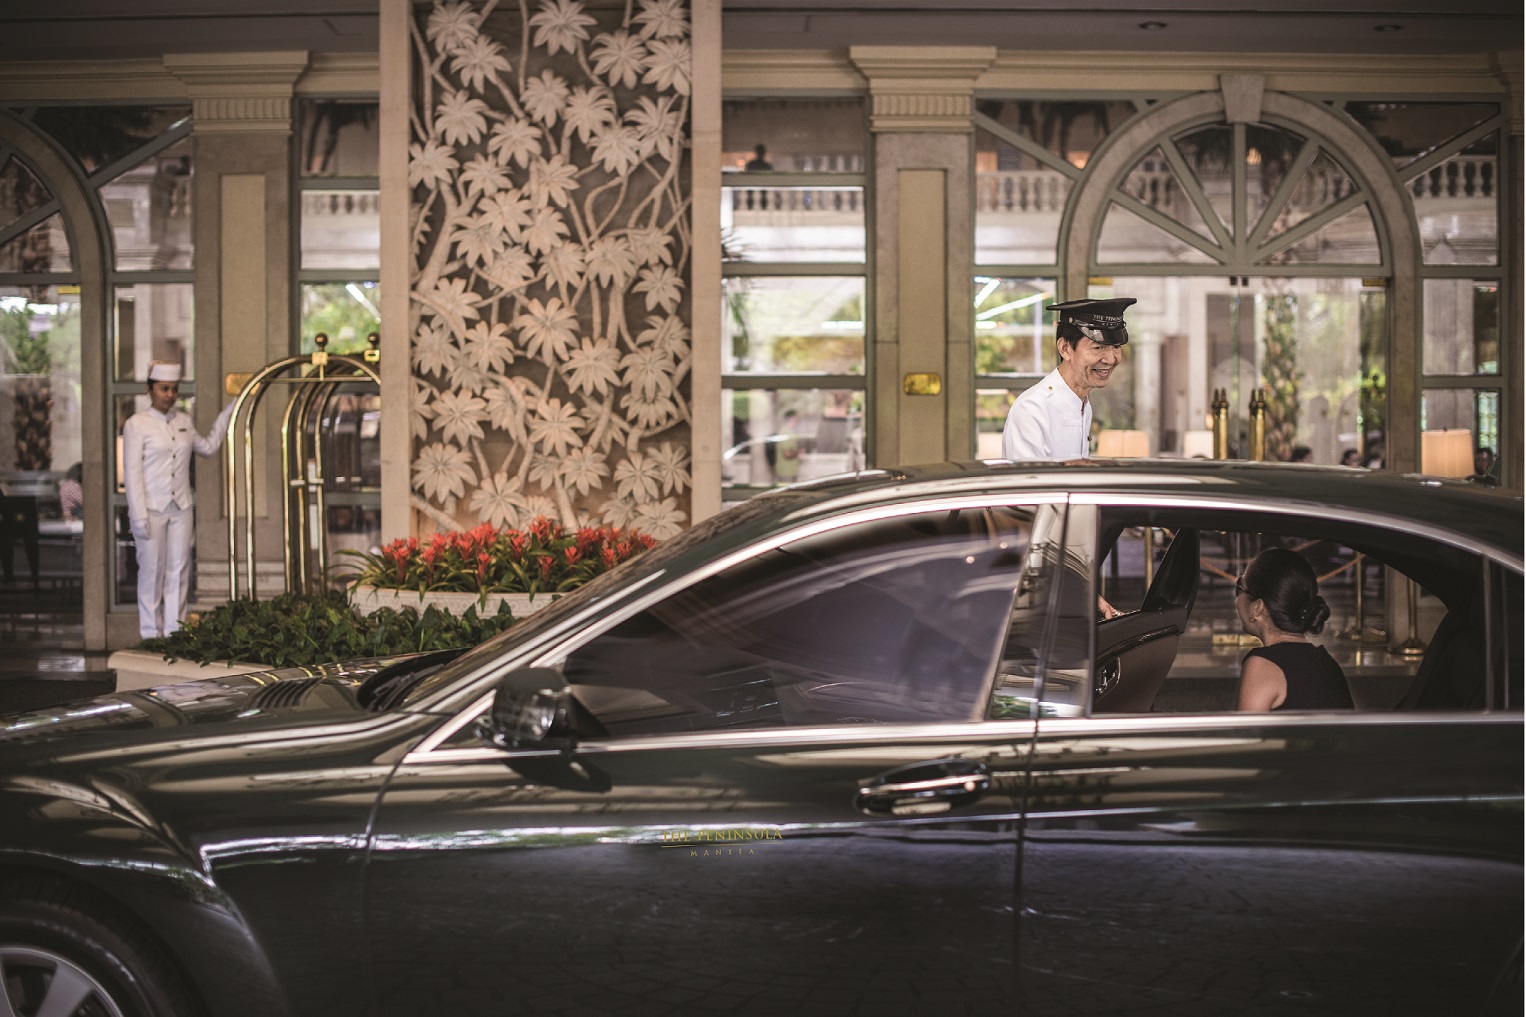 In celebration of their Five-Star achievement, The Peninsula Hotels is pleased to offer guests a special reward. Between 27 February to 31 May 2019, guests can enjoy the best available rate, flexible check-in, and check-out, an upgrade to the next available room category and a dining or spa credit when booking through www.peninsula.com.